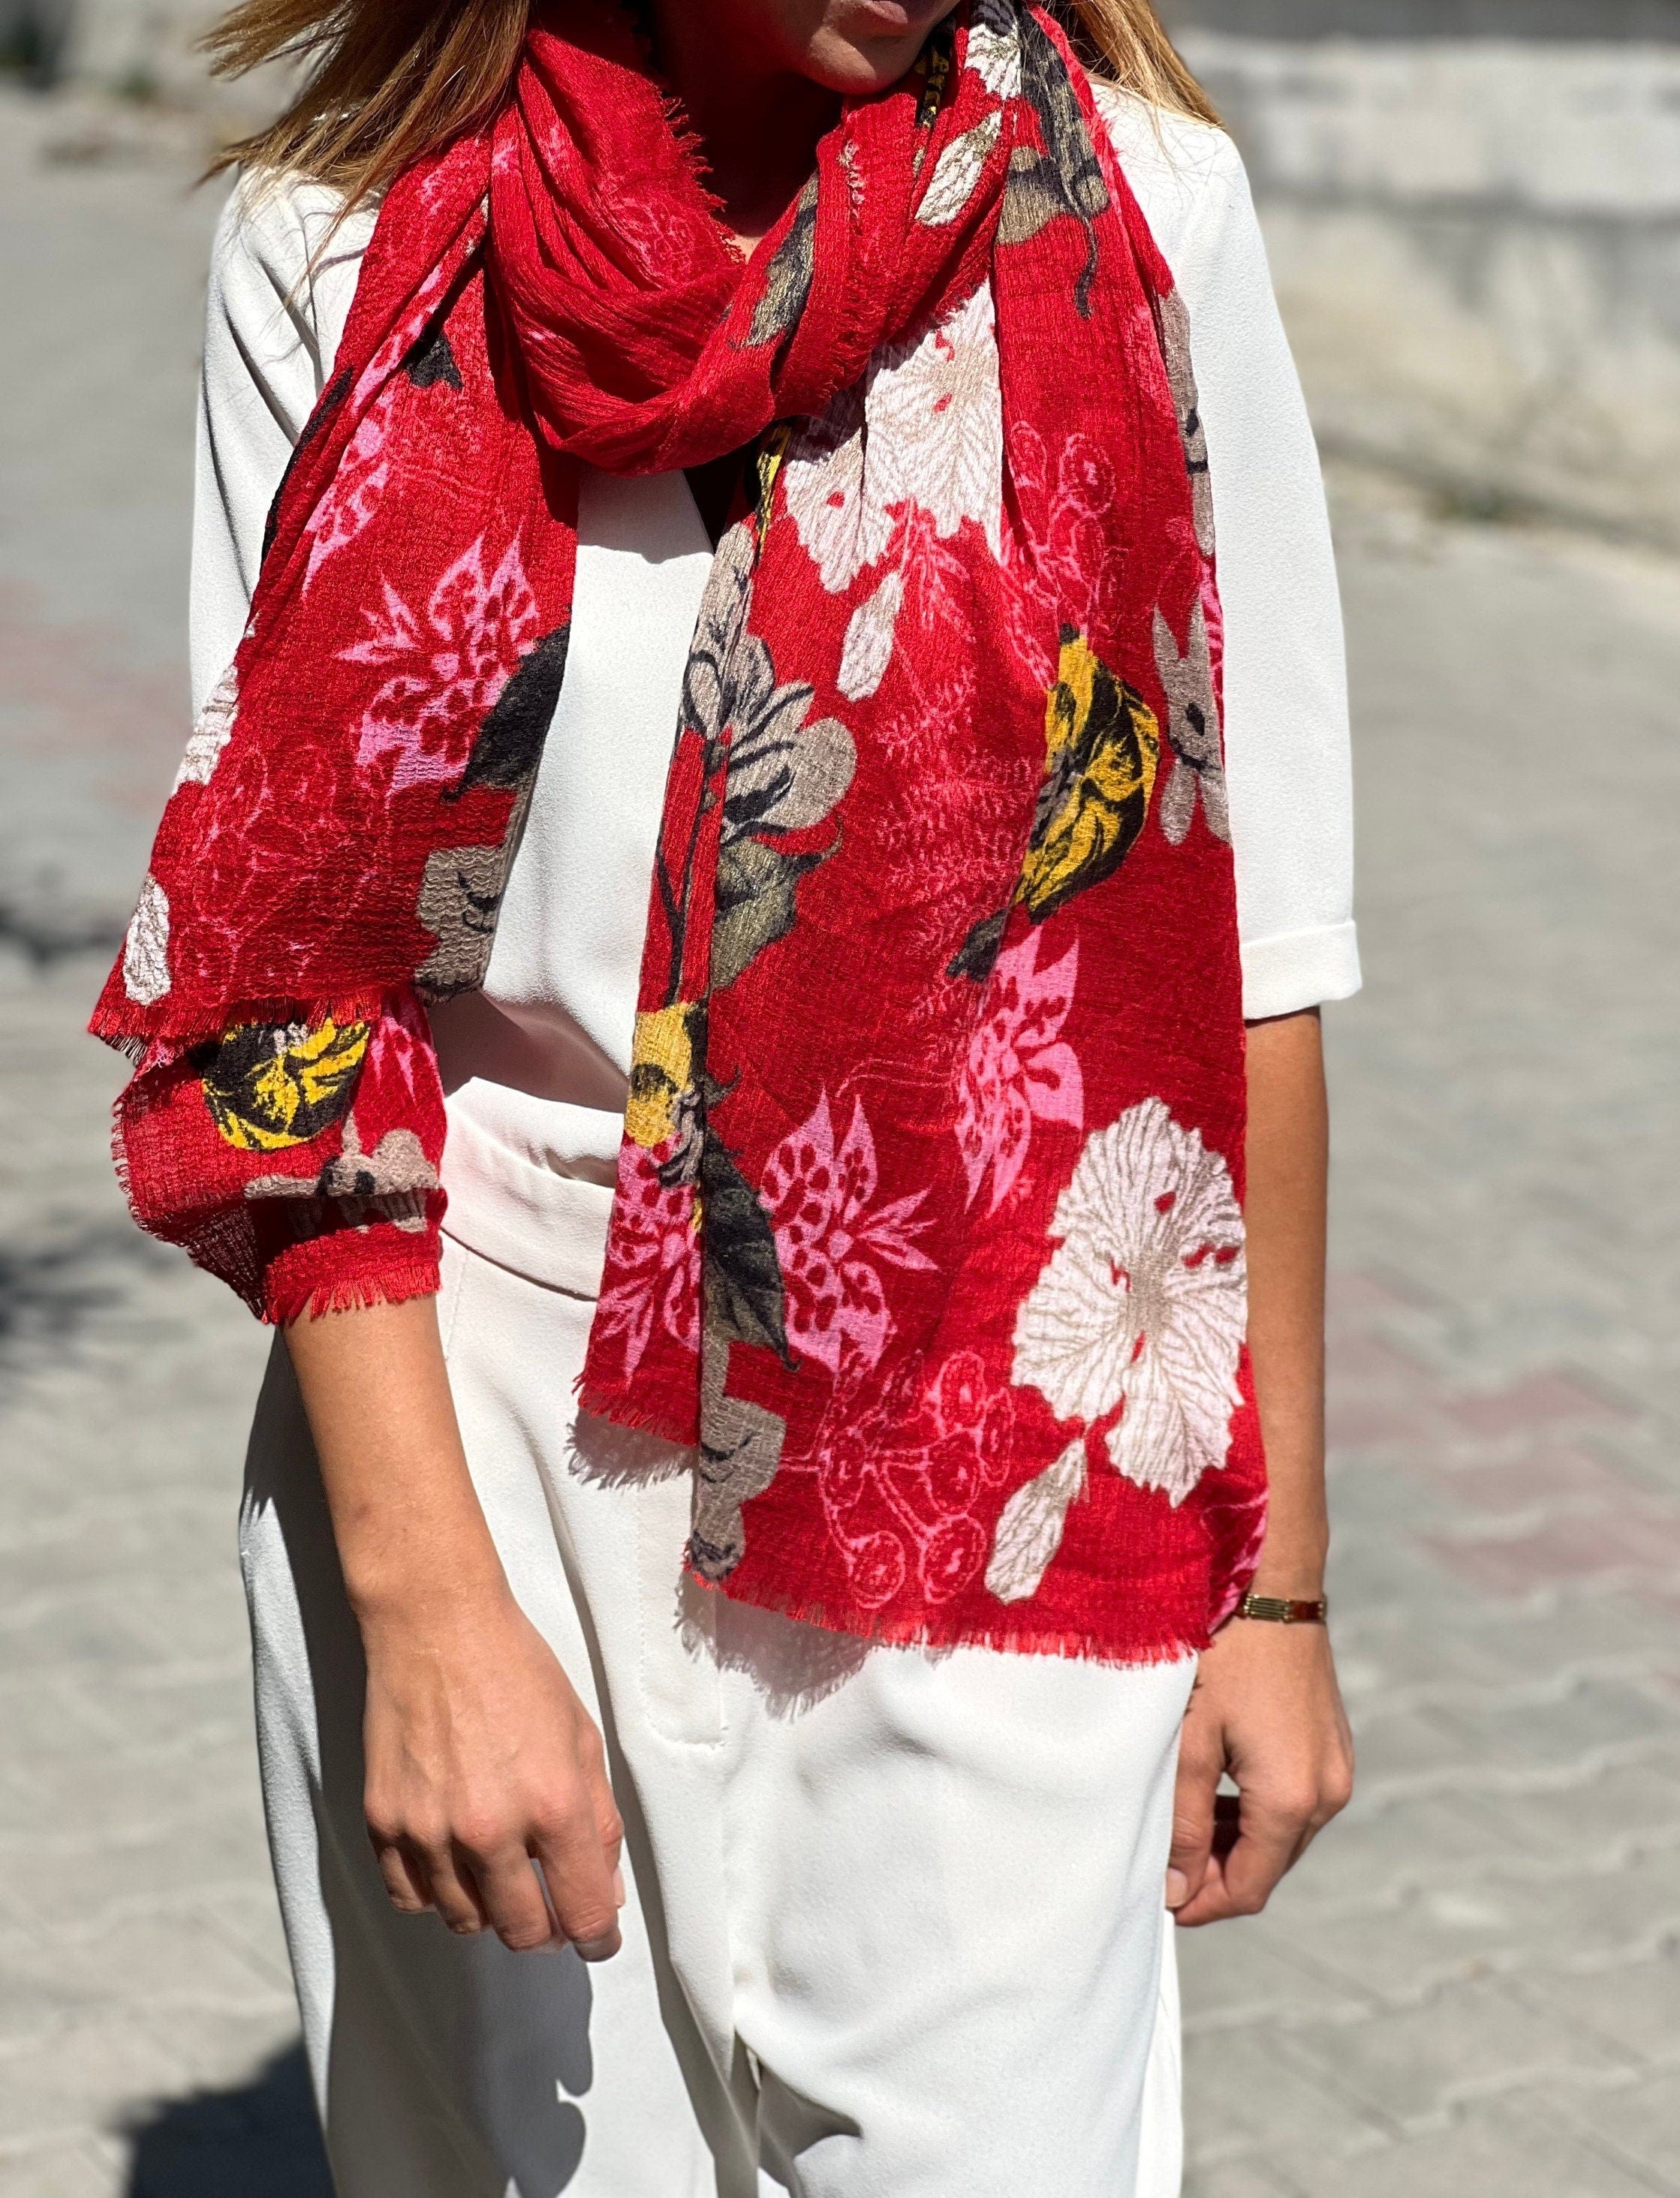 Make a statement with this gorgeous 100% Cotton Bright Red Floral Scarf!